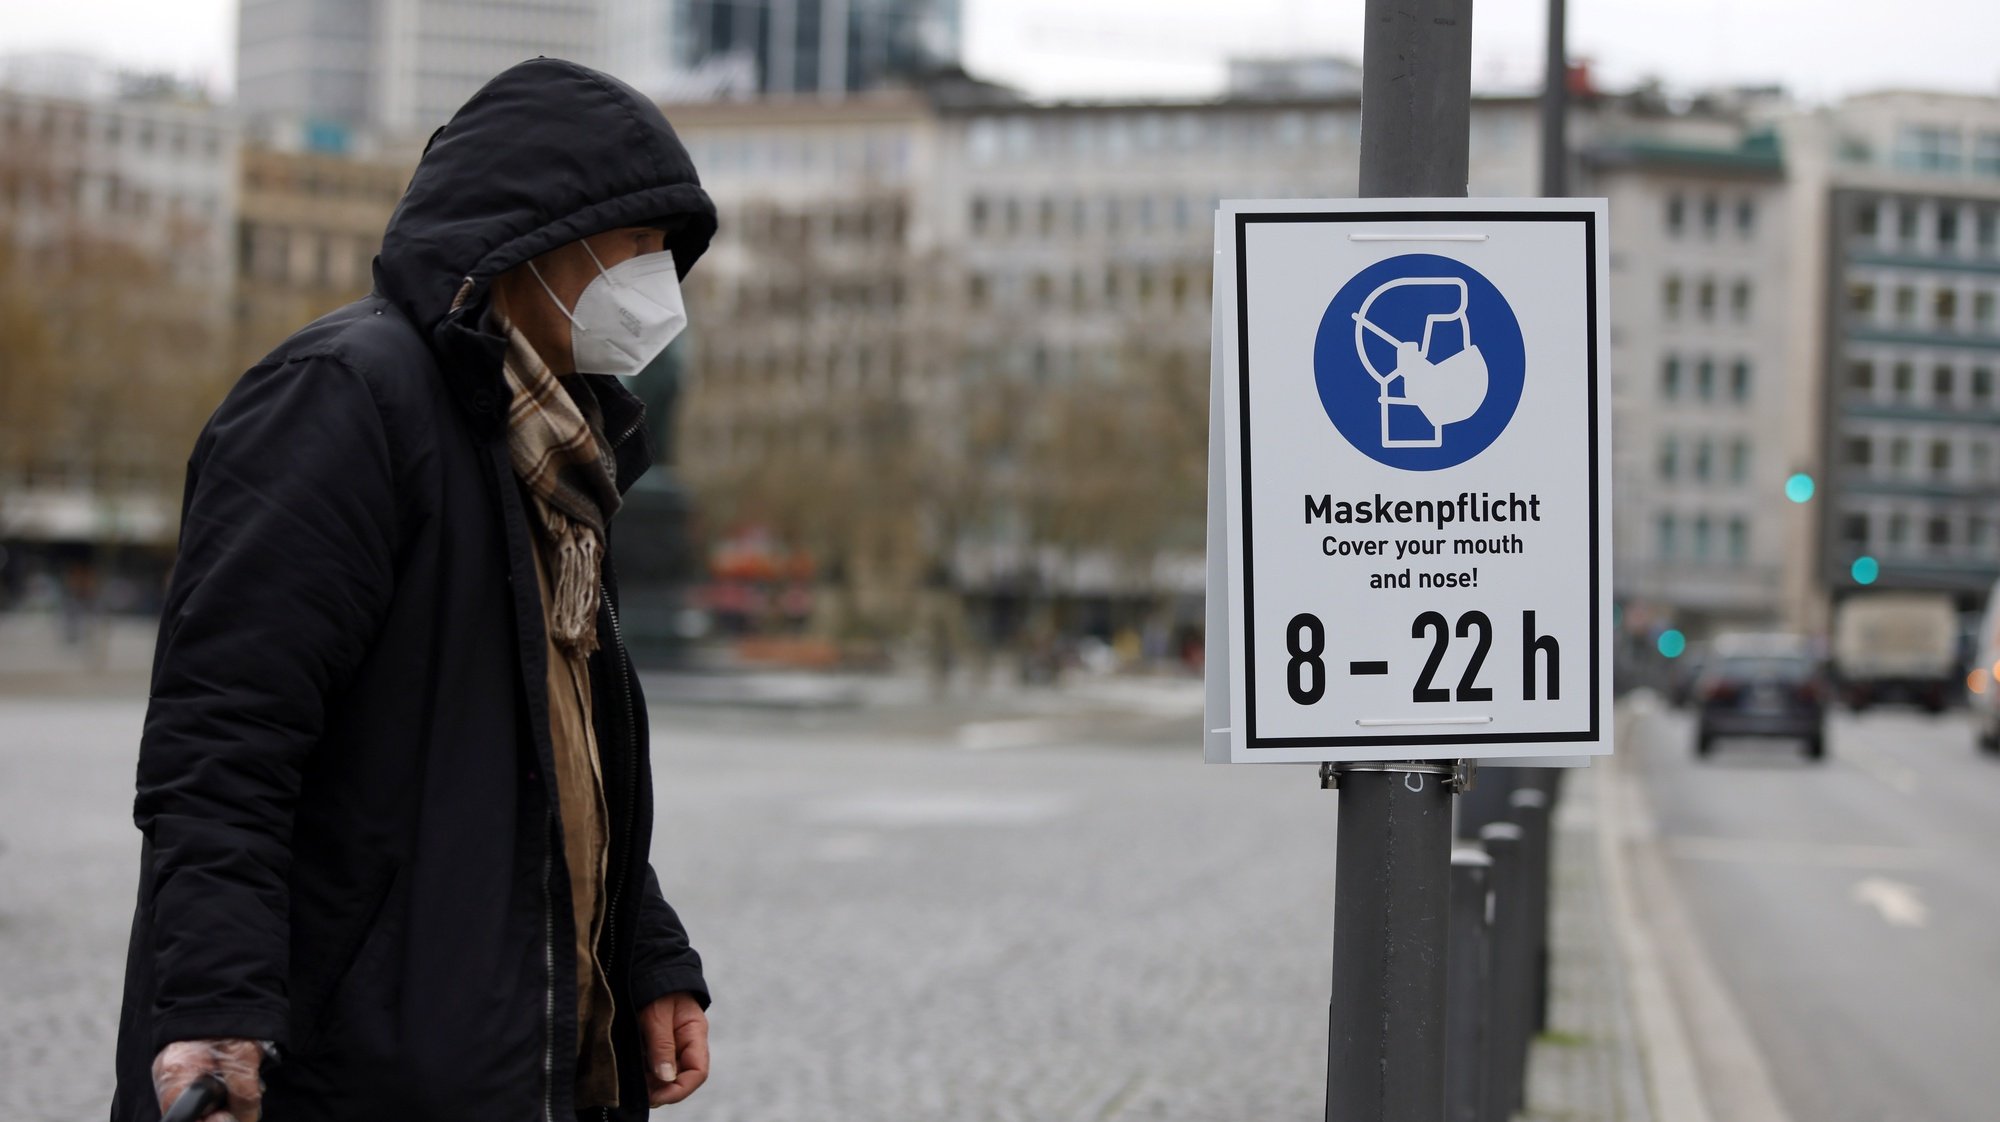 epa08937087 A sign demands wearing face masks at the shopping street &#039;Zeil&#039; in Frankfurt am Main, Germany, 14 January 2021. Due to an increasing number of cases of the COVID-19 pandemic caused by the SARS CoV-2 coronavirus, nationwide restrictions have been introduced to counteract a rise in infections.  EPA/RONALD WITTEK